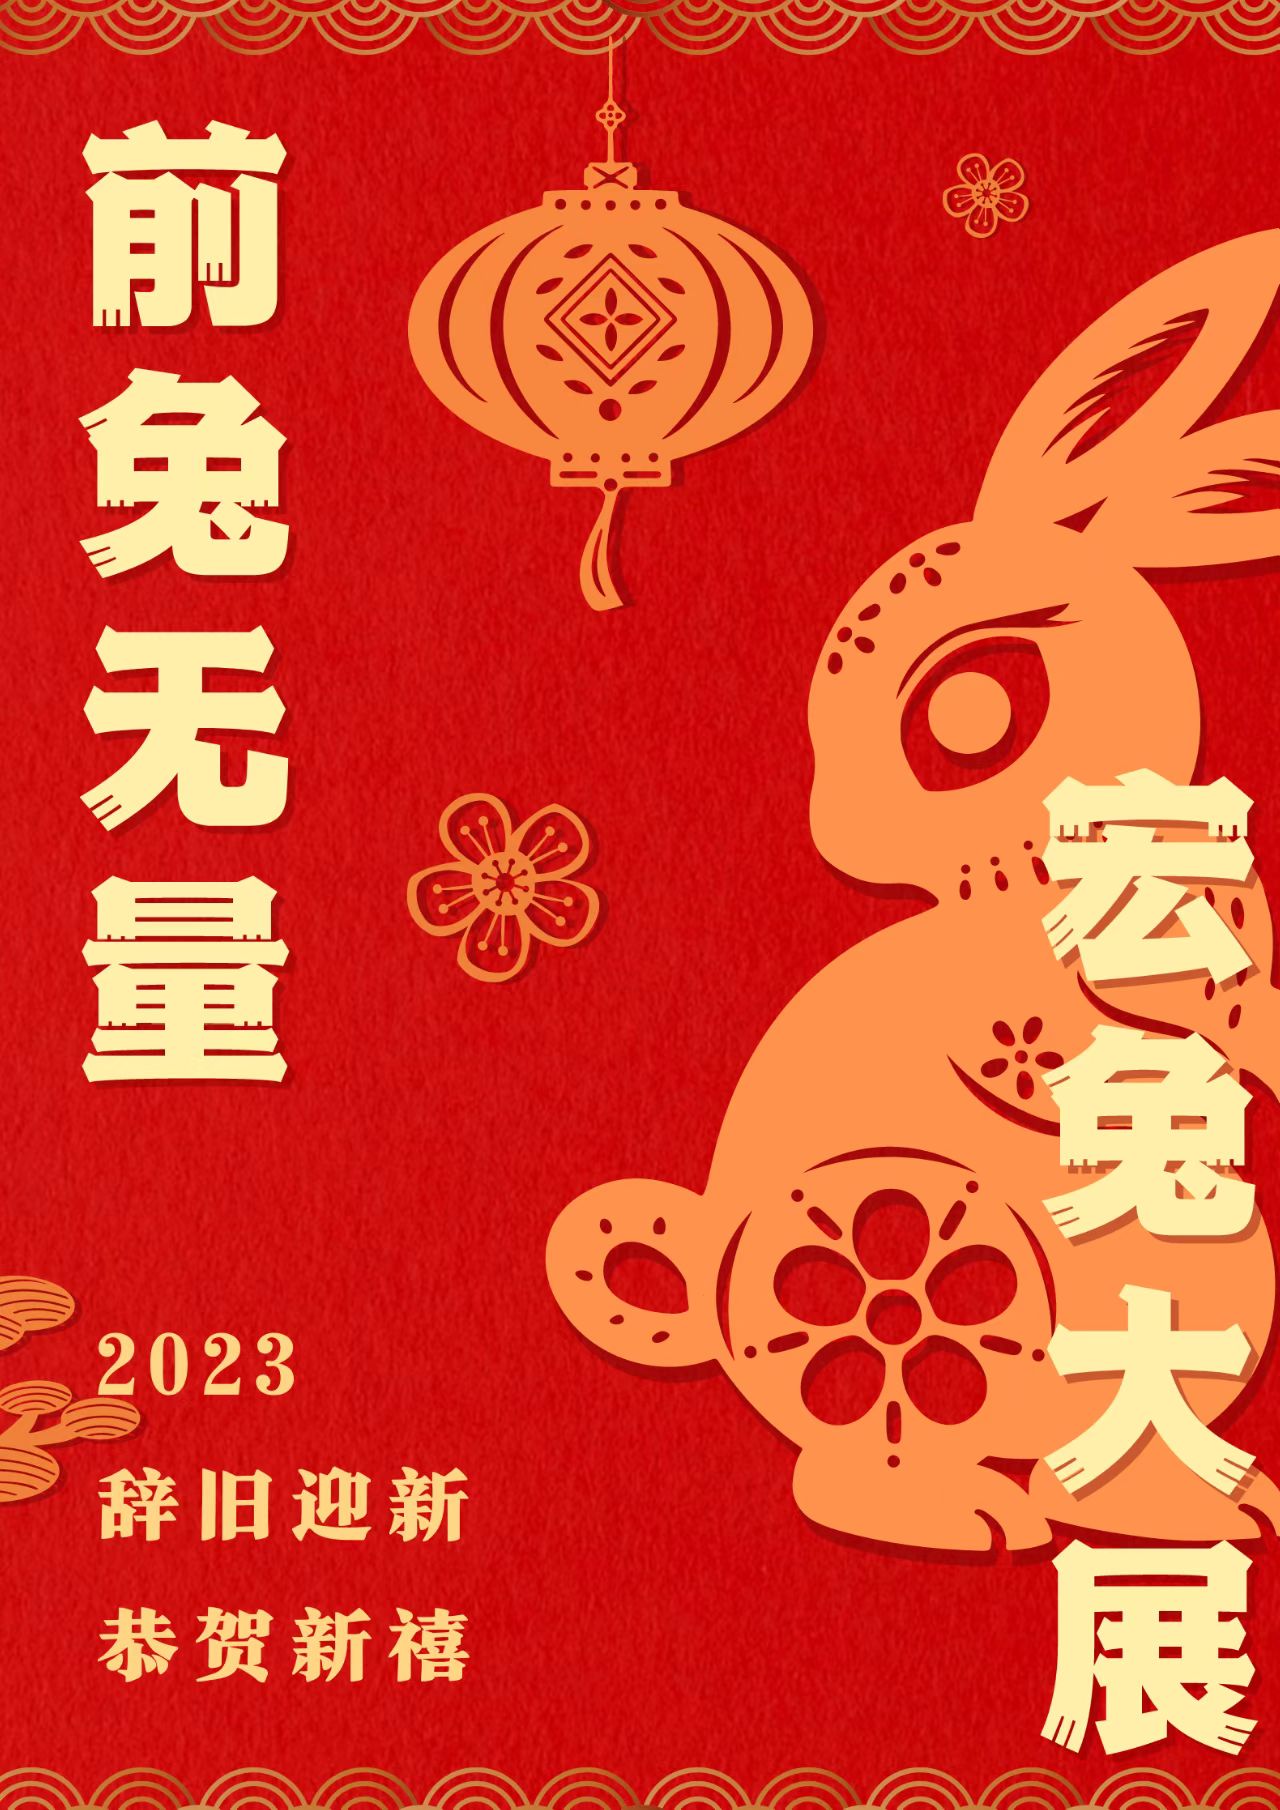 <i style='font-style:normal;color:#f00f00'>HAPPY LUNAR NEW YEAR!</i>